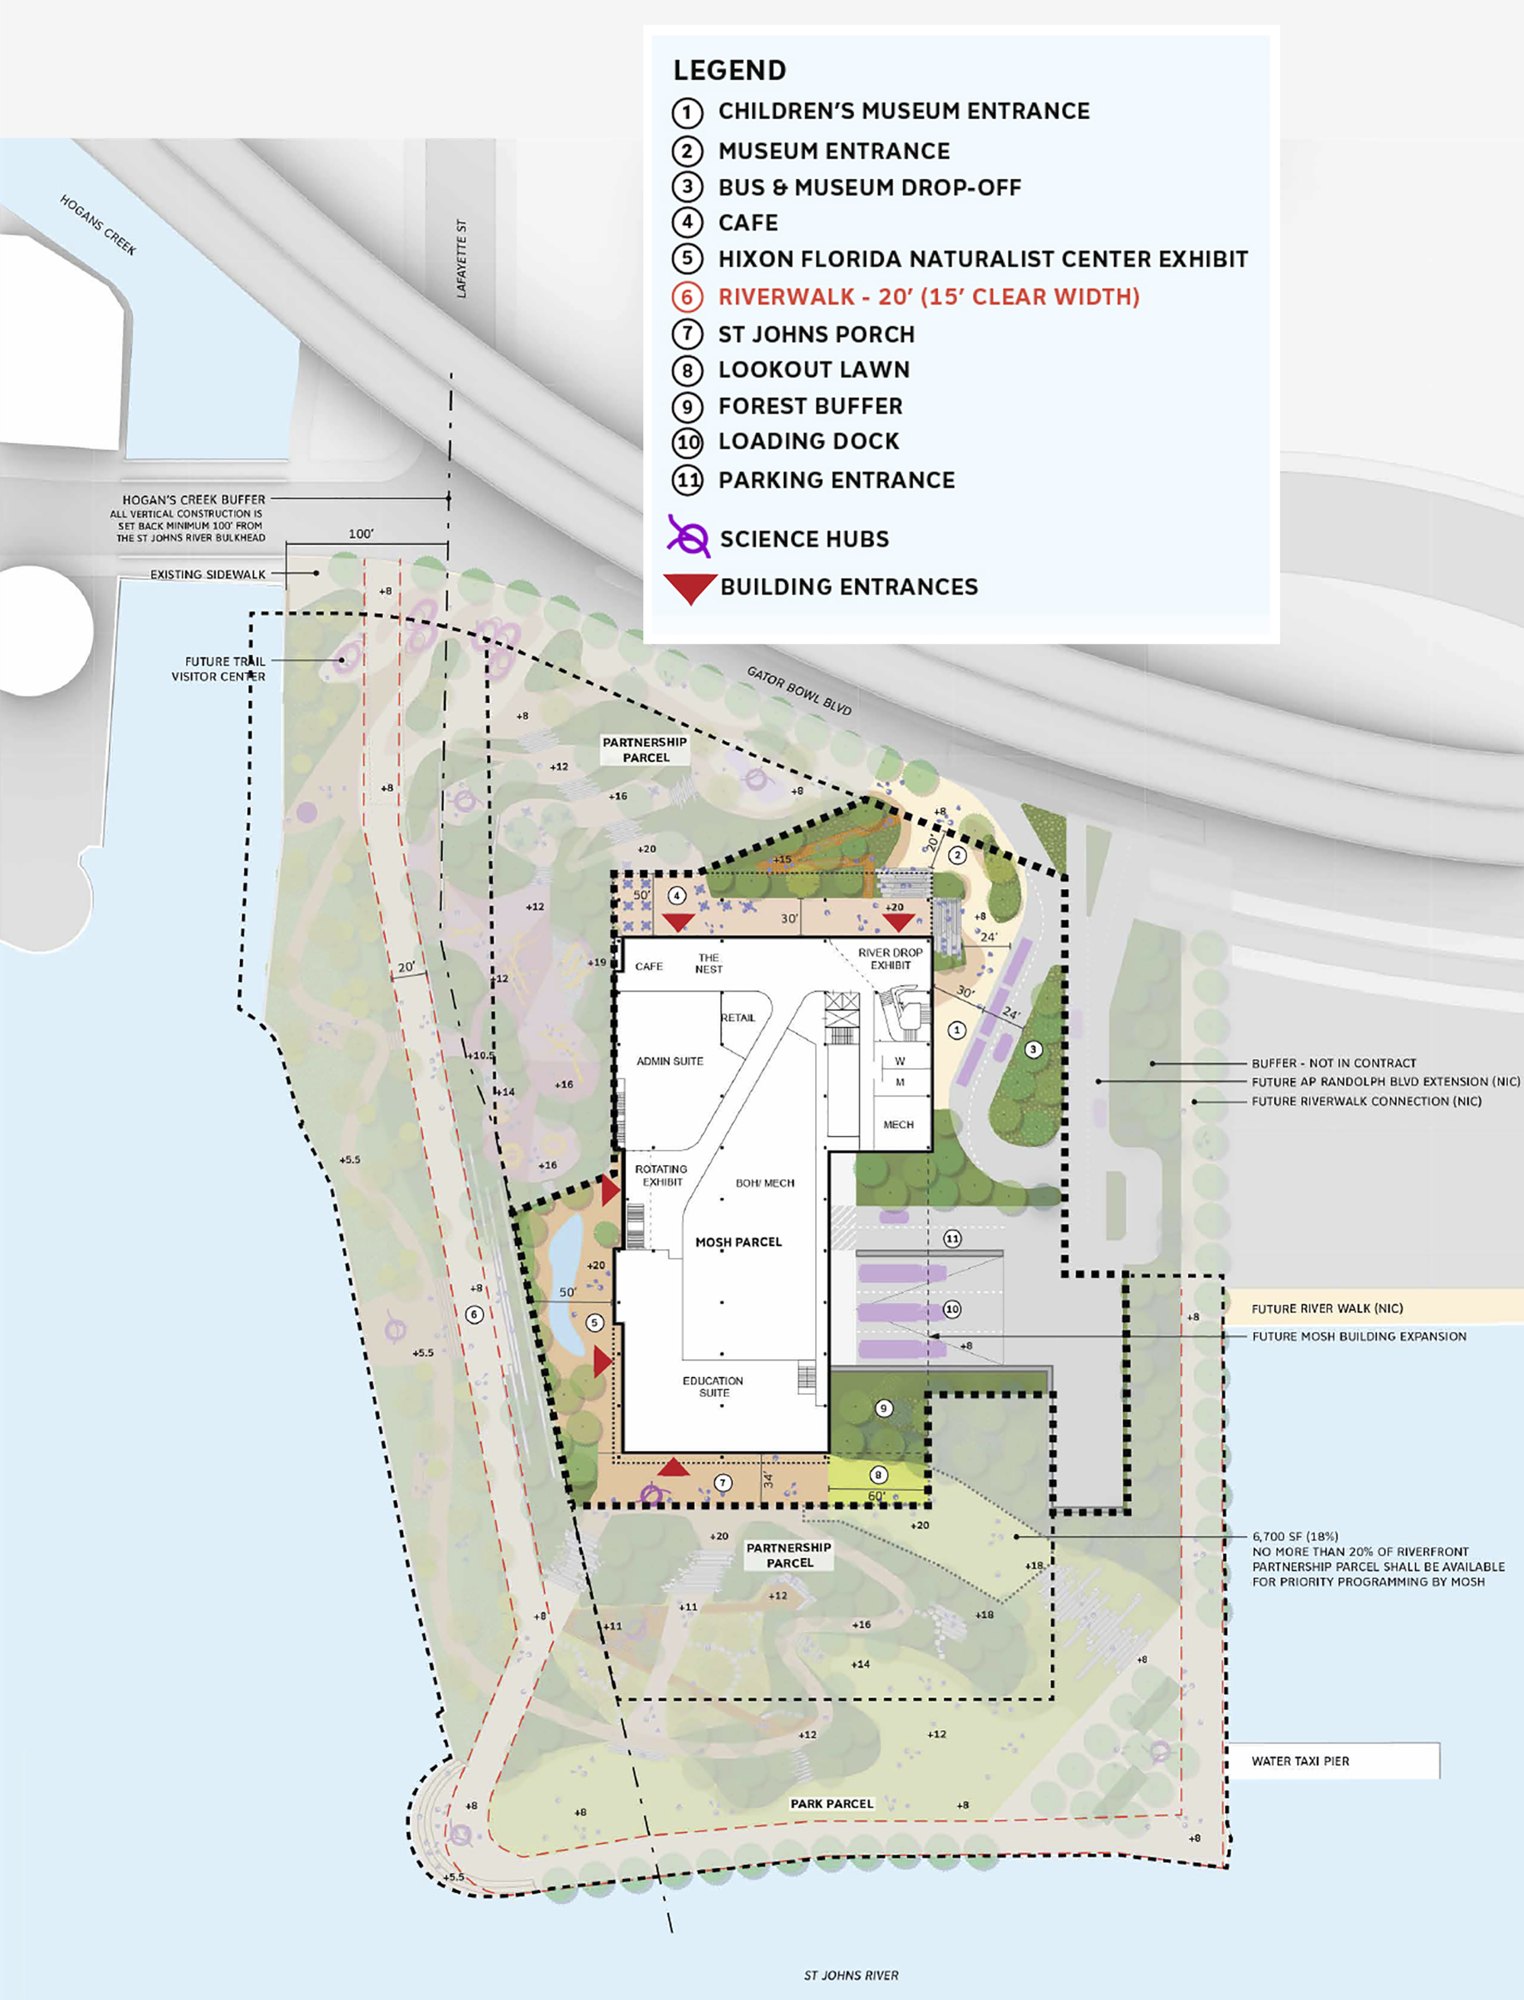 The site plan for the Museum of Science & History.